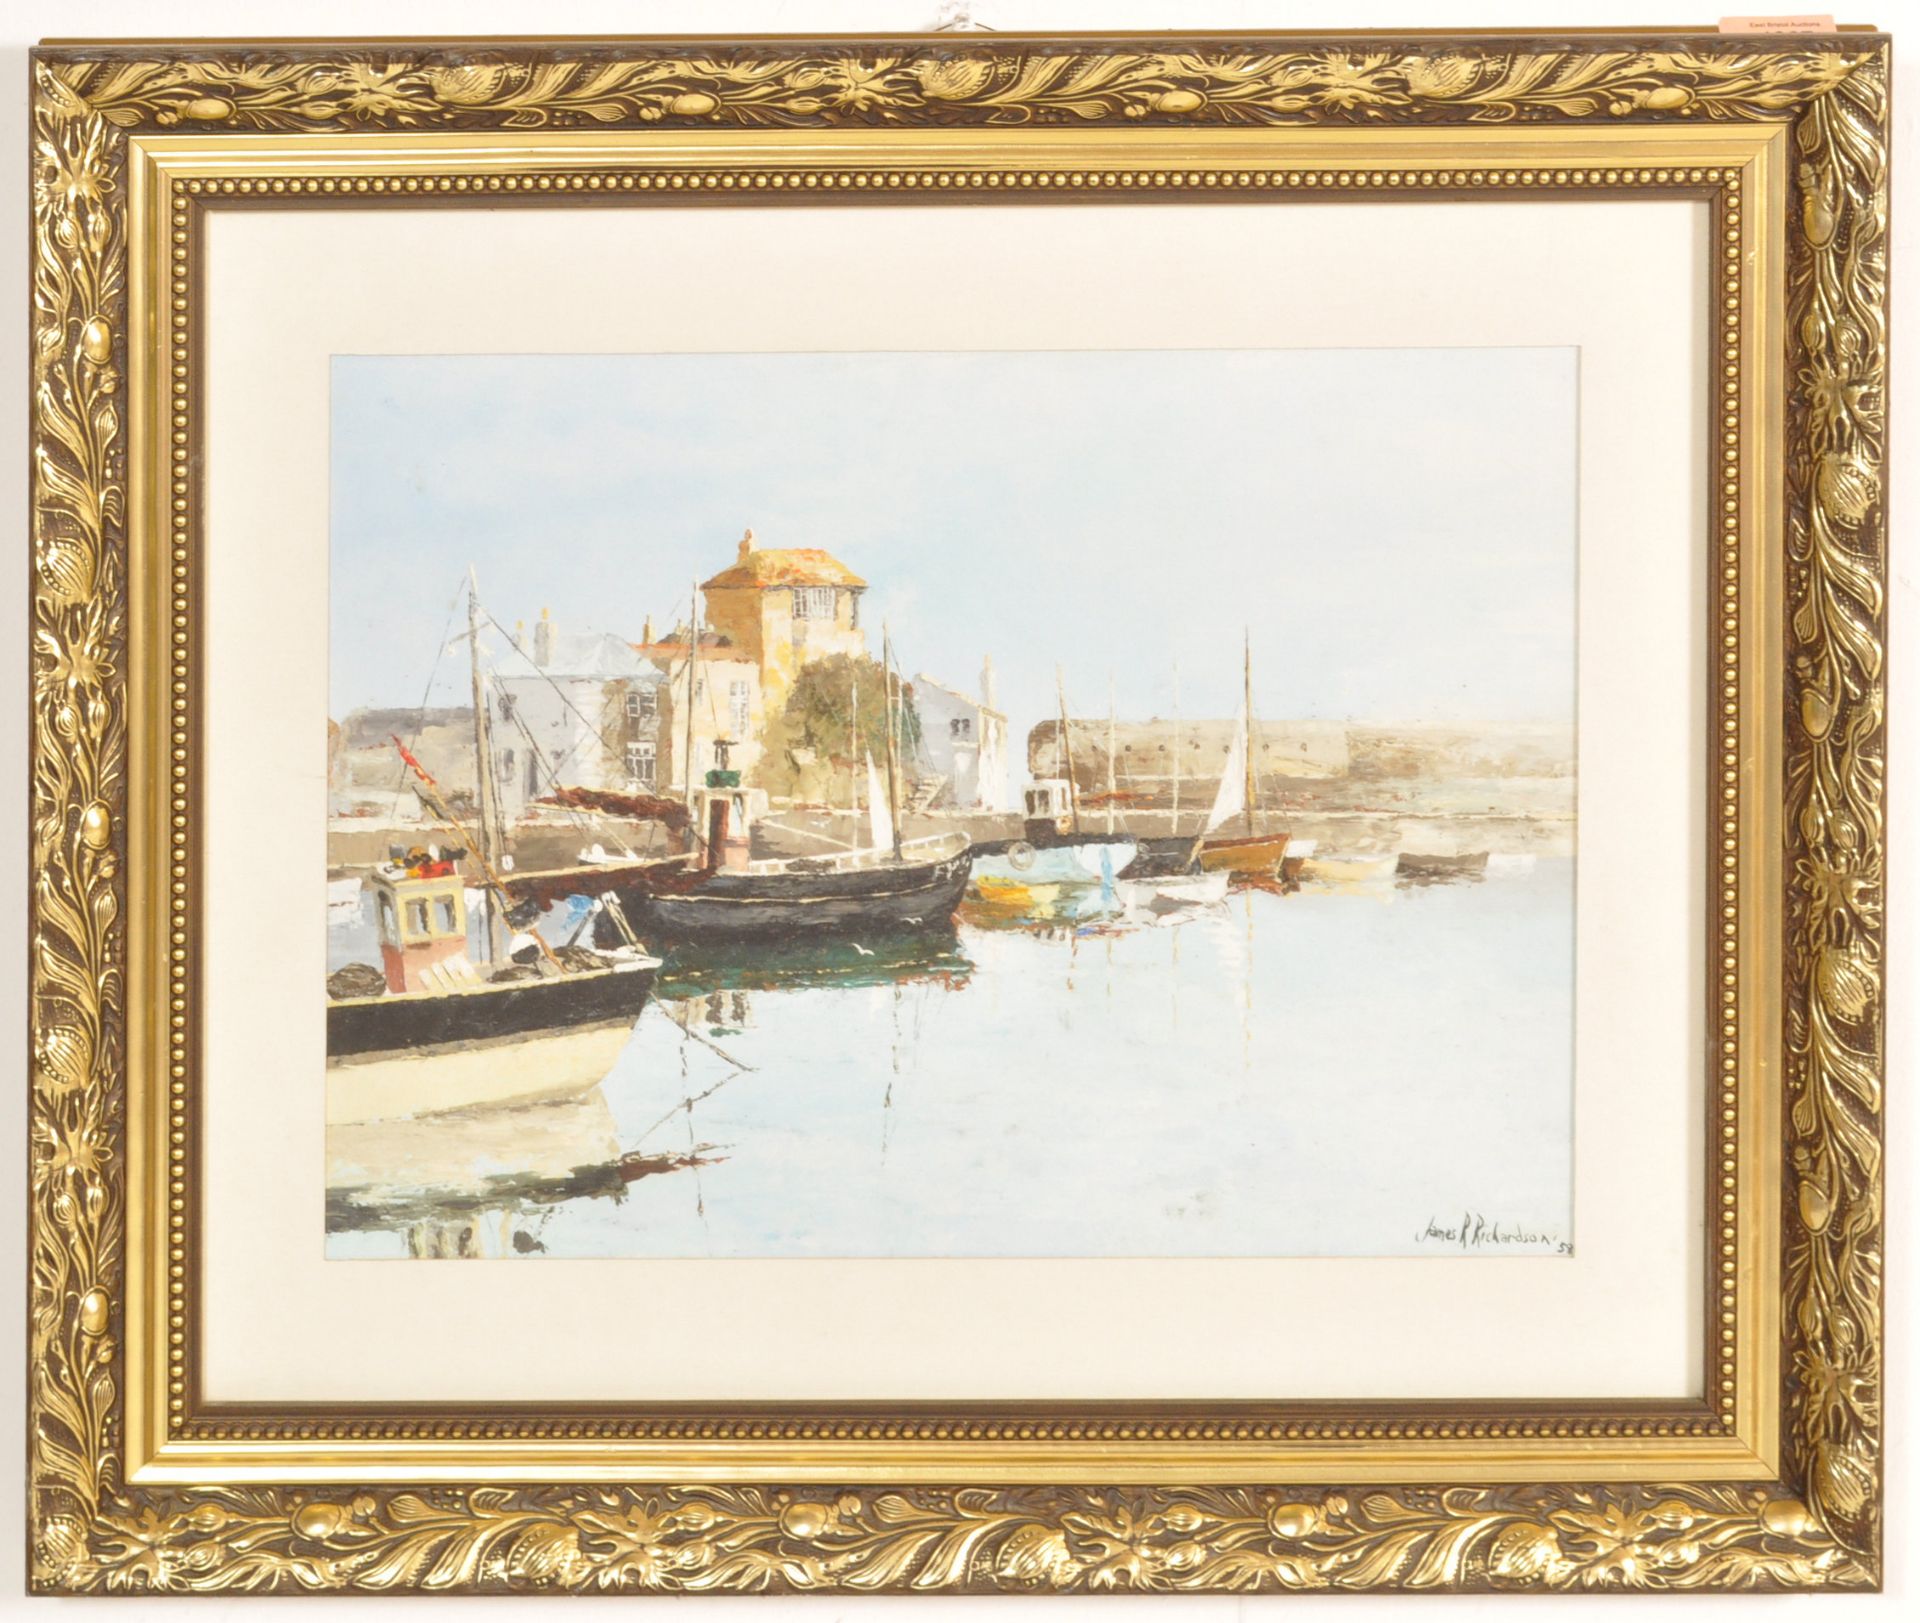 MID 20TH CENTURY OIL ON BOARD PAINTING OF A CORNISH HARBOUR